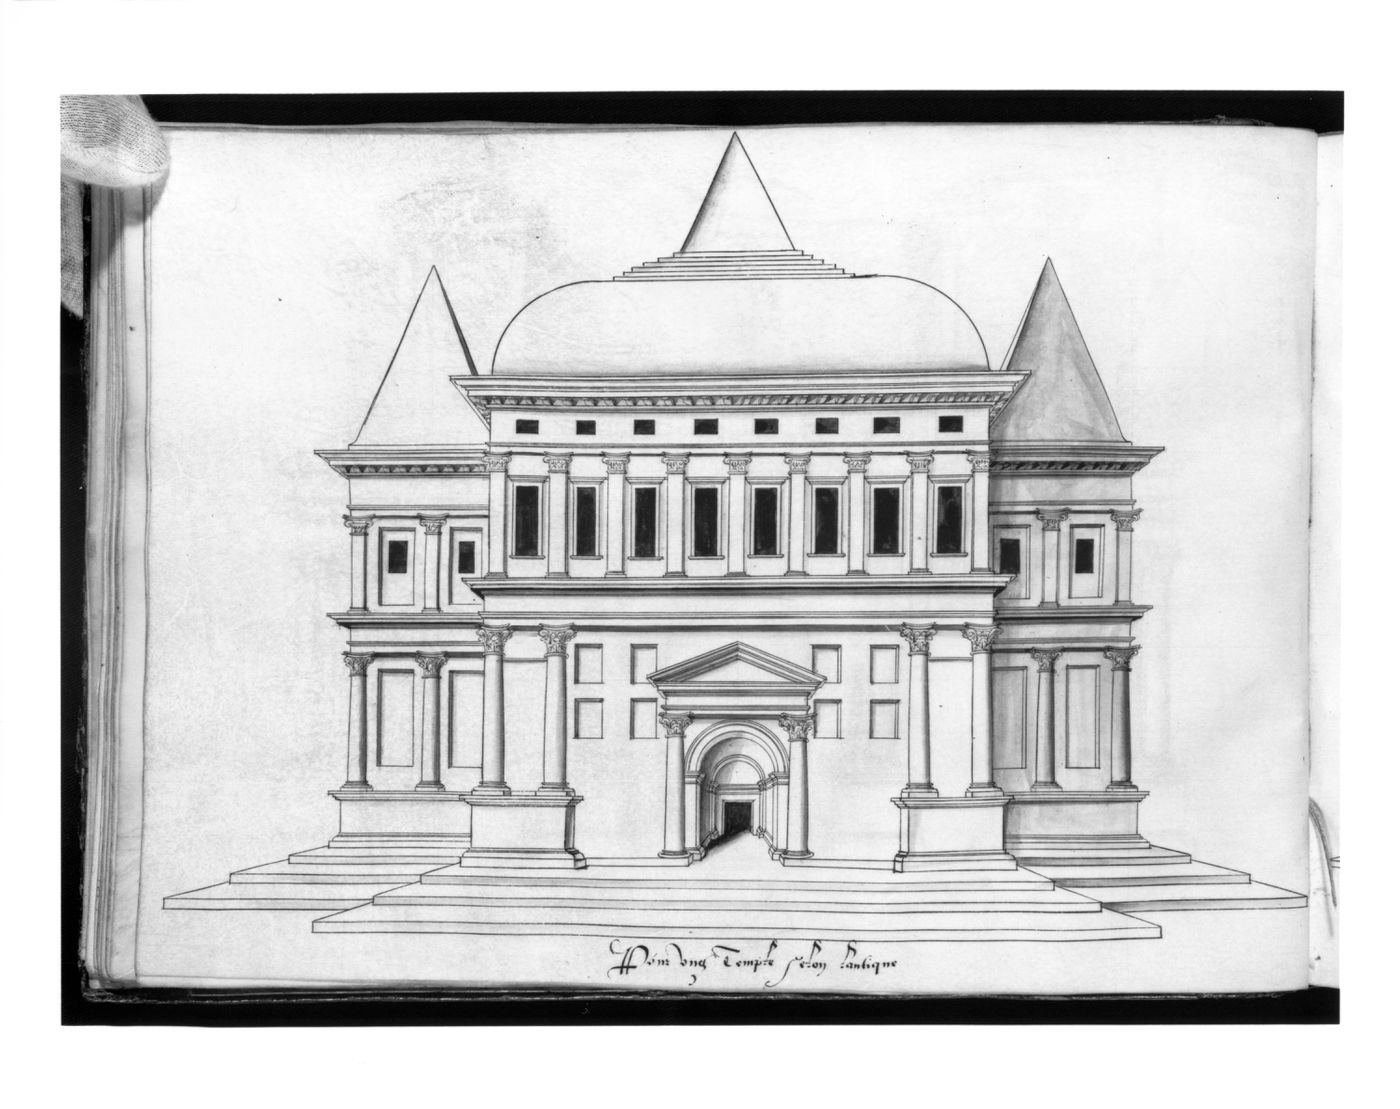 Perspectival elevation for a temple in the antique manner